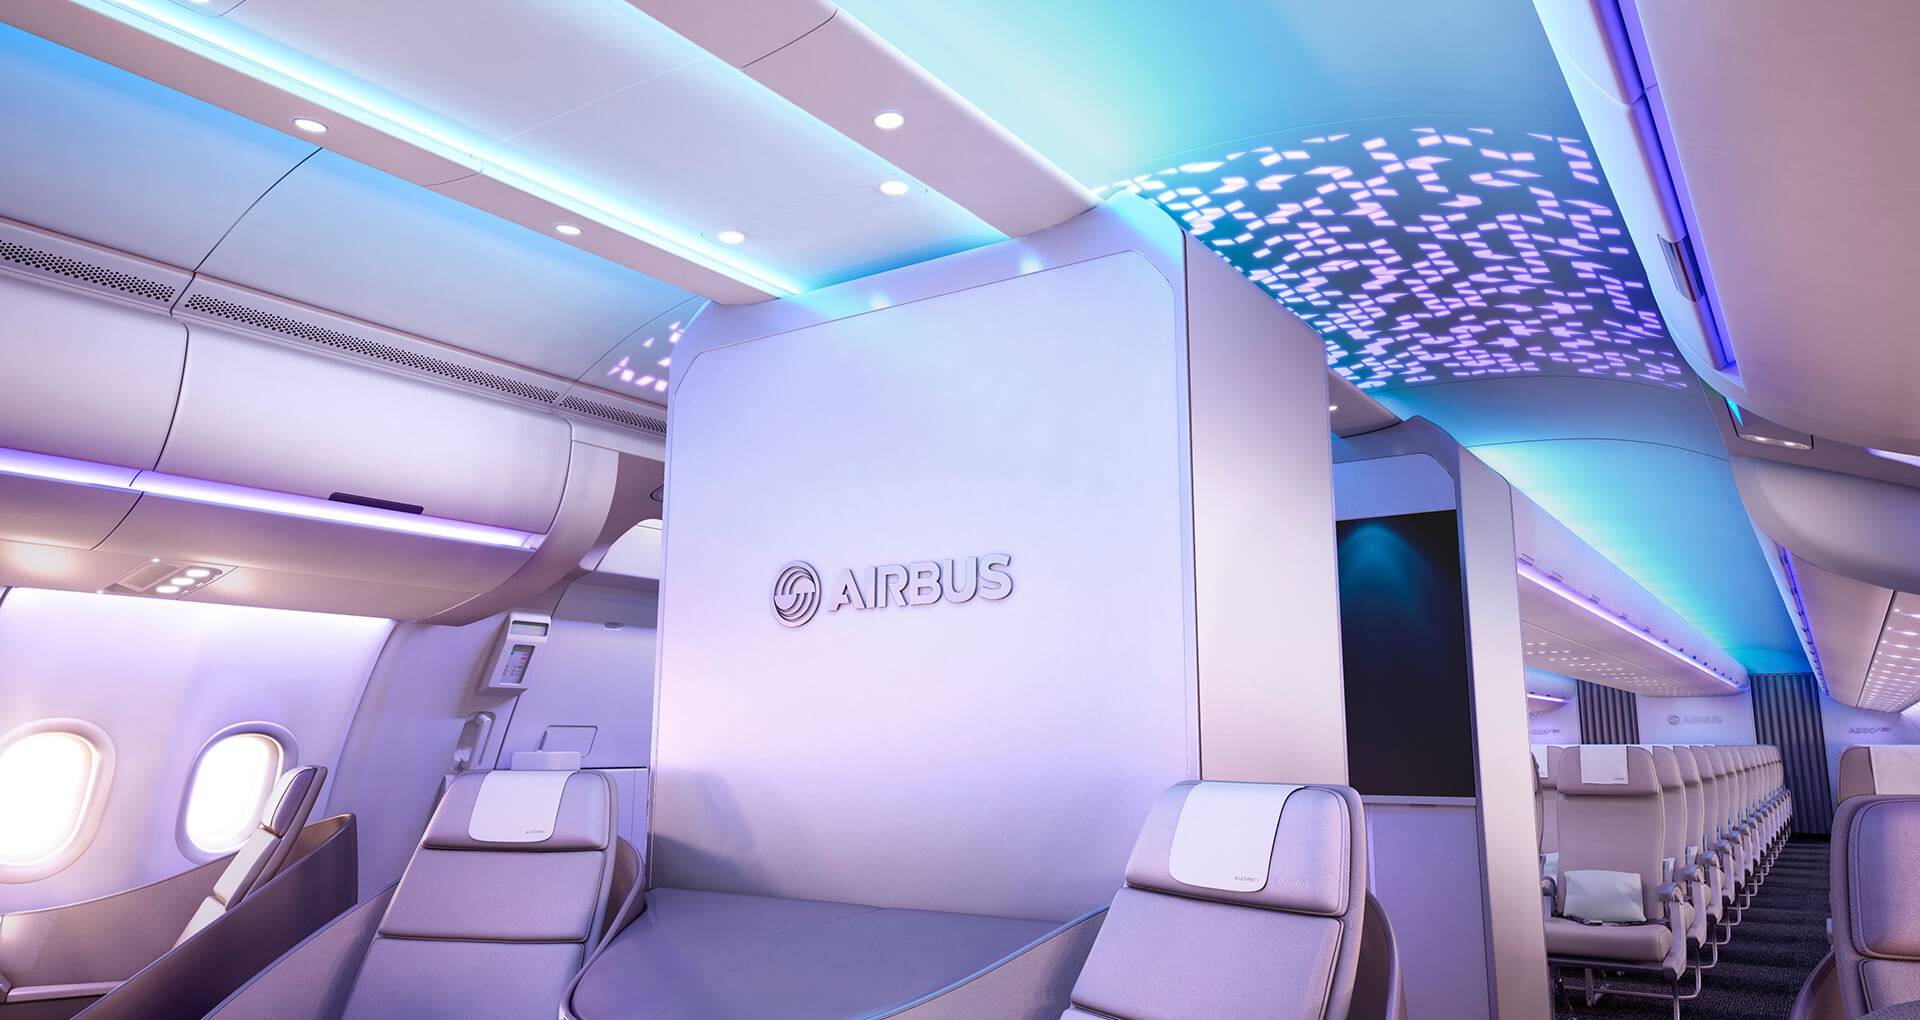 Airbus 3D logo on a bulkhead in Business Class on the A330neo Airspace cabin. The Economy cabin can be seen in the back. An intricate pattern features on the ceiling in the space between Business and Economy class